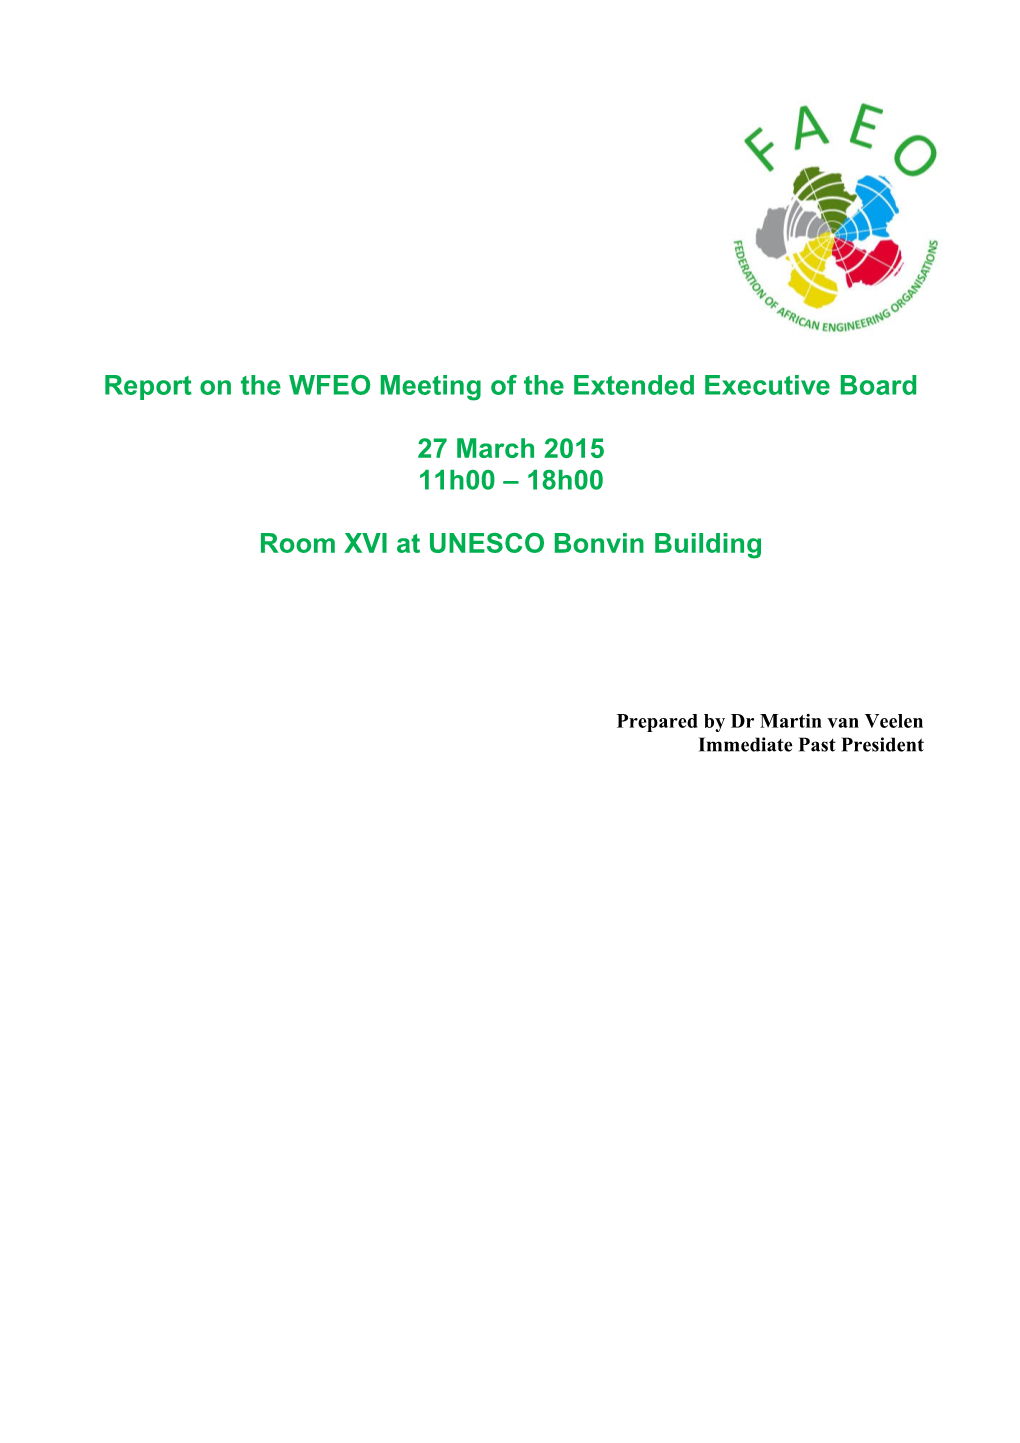 DRAFT AGENDA (5)For the WFEO Meeting of the Extended Executive Board27